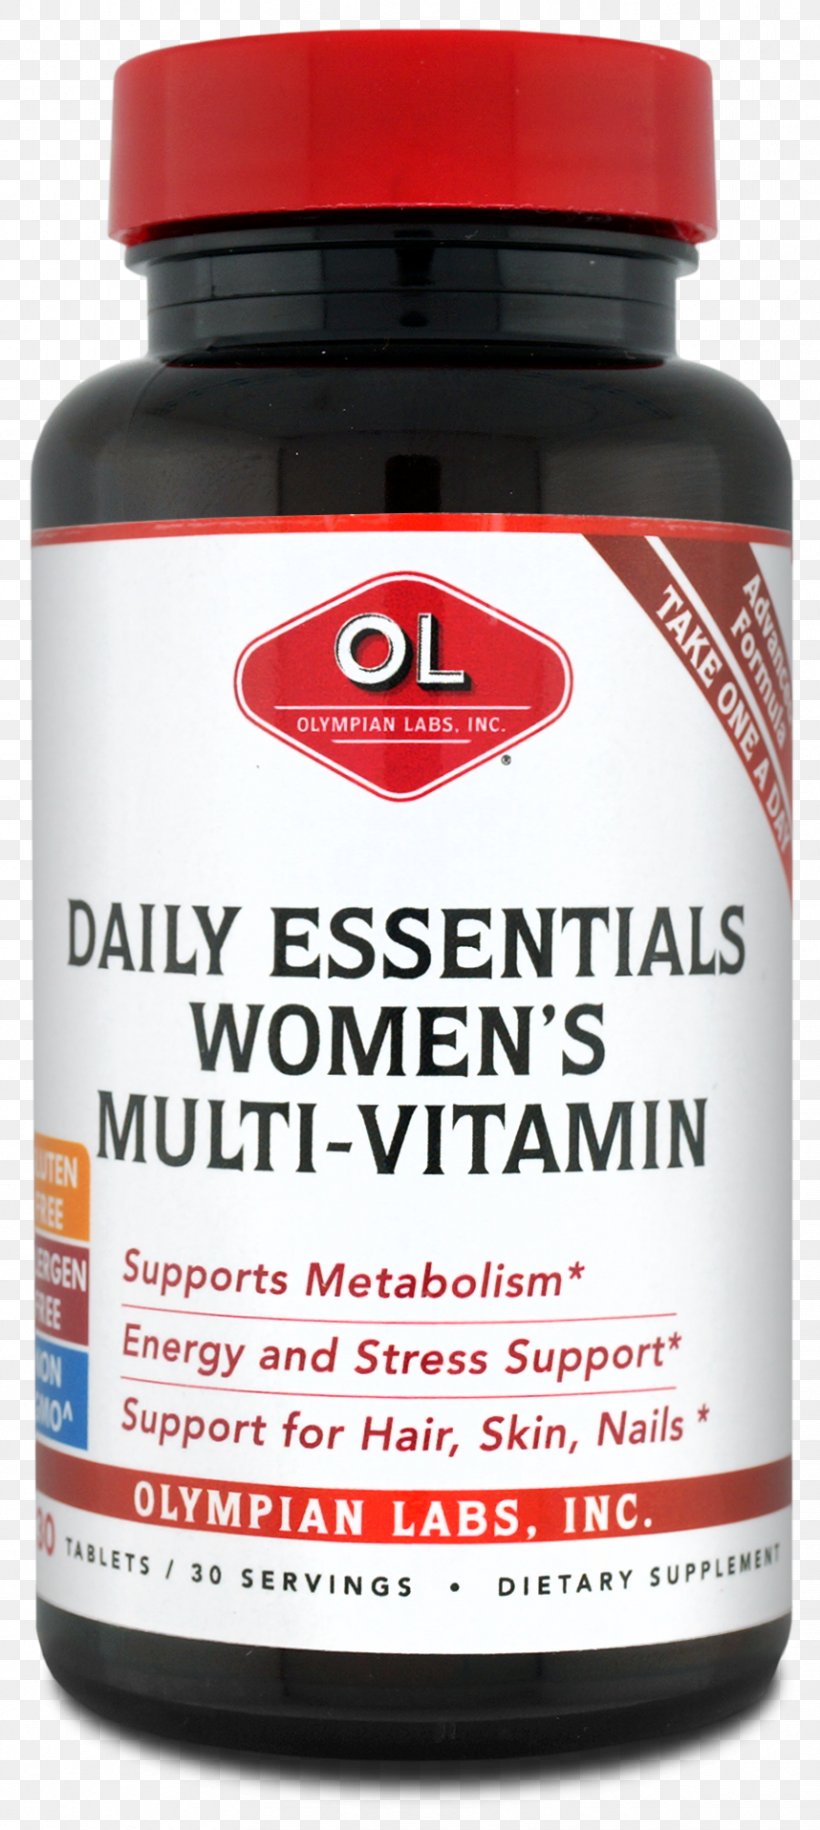 Dietary Supplement Olympian Labs Inc. Daily Essentials Women's Multi-Vitamin Flavor By Bob Holmes, Jonathan Yen (narrator) (9781515966647) Product Olympian Labs, Inc., PNG, 858x1915px, Dietary Supplement, Diet, Flavor, Tablet Download Free